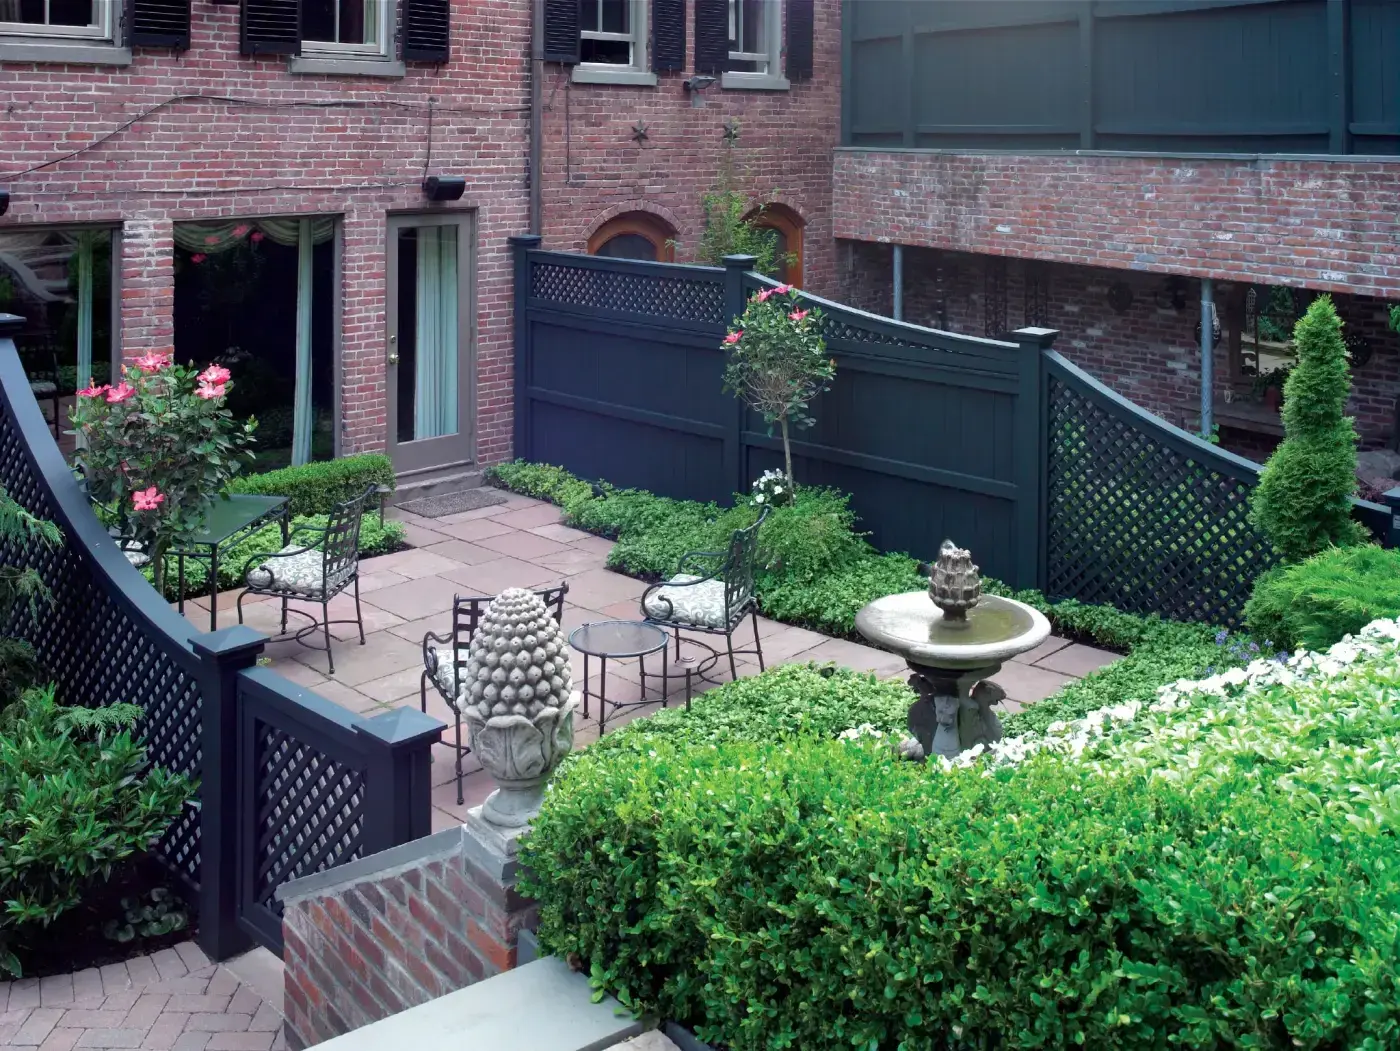 A Small backyard can become an enchanting oasis. Learn about several ways you can maximize your space.
